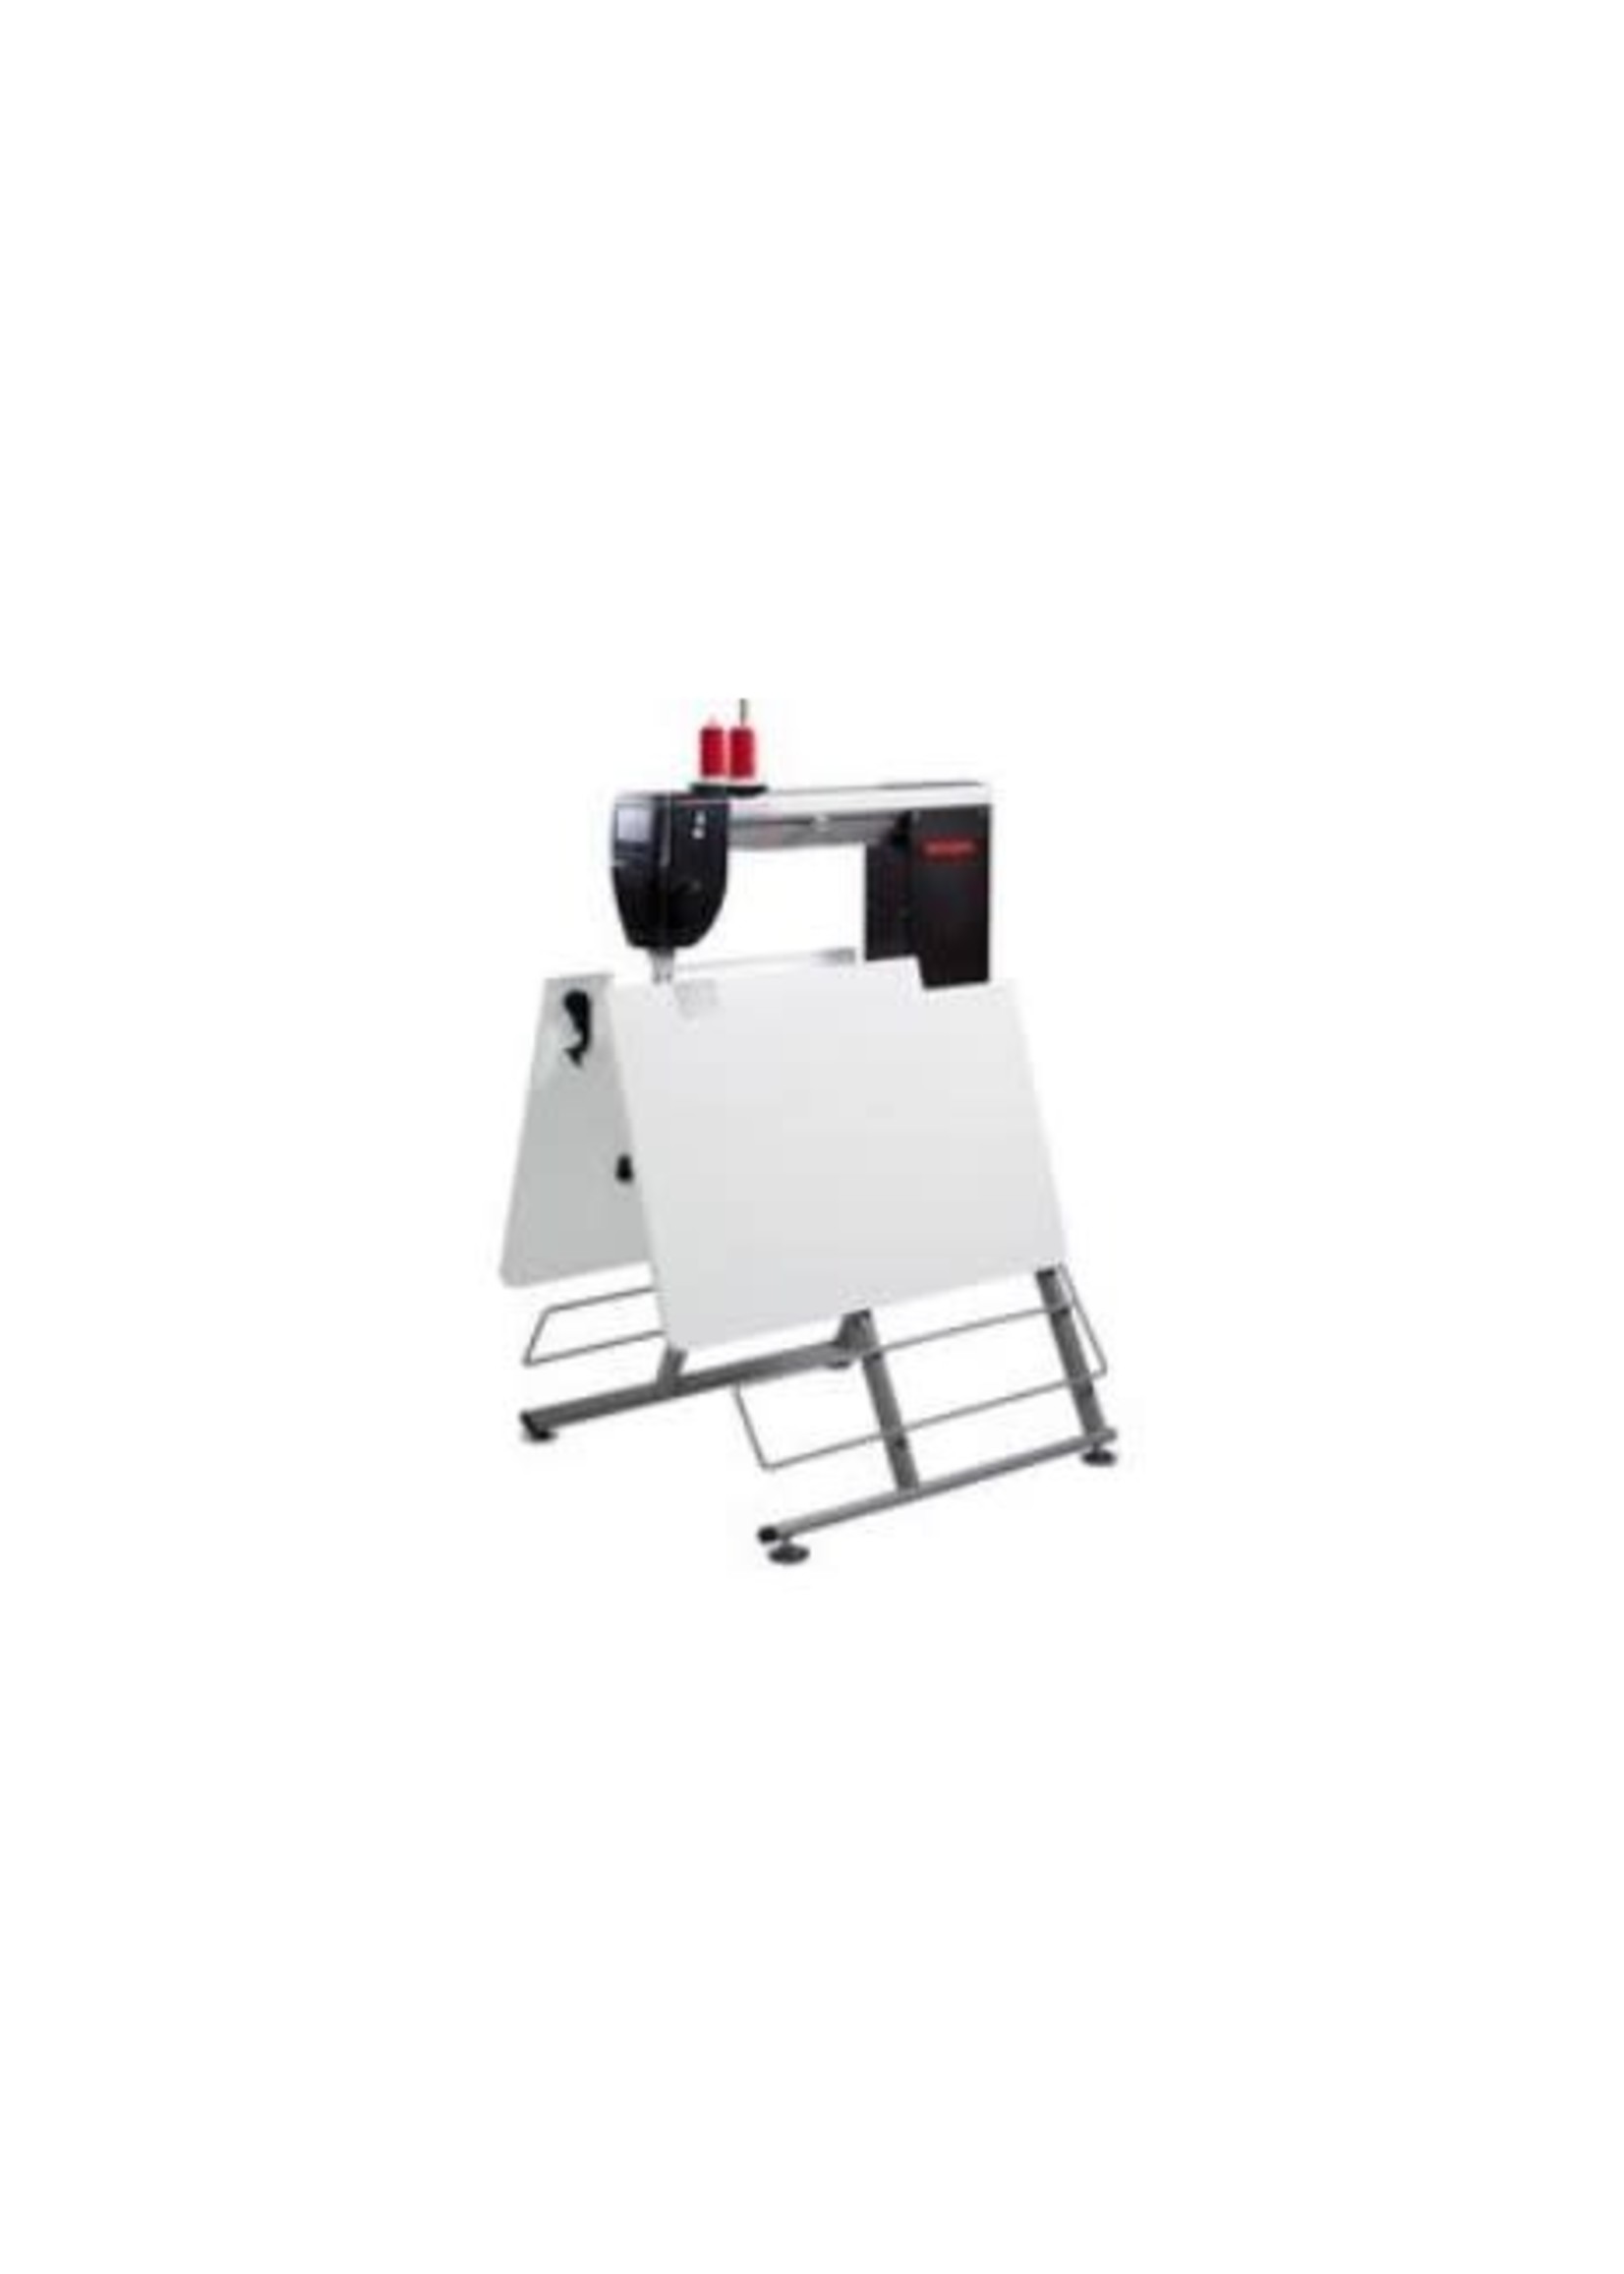 Bernina Bernina Q20 sit down with Foldable table - AVAILABLE FOR IN-STORE PURCHASE ONLY